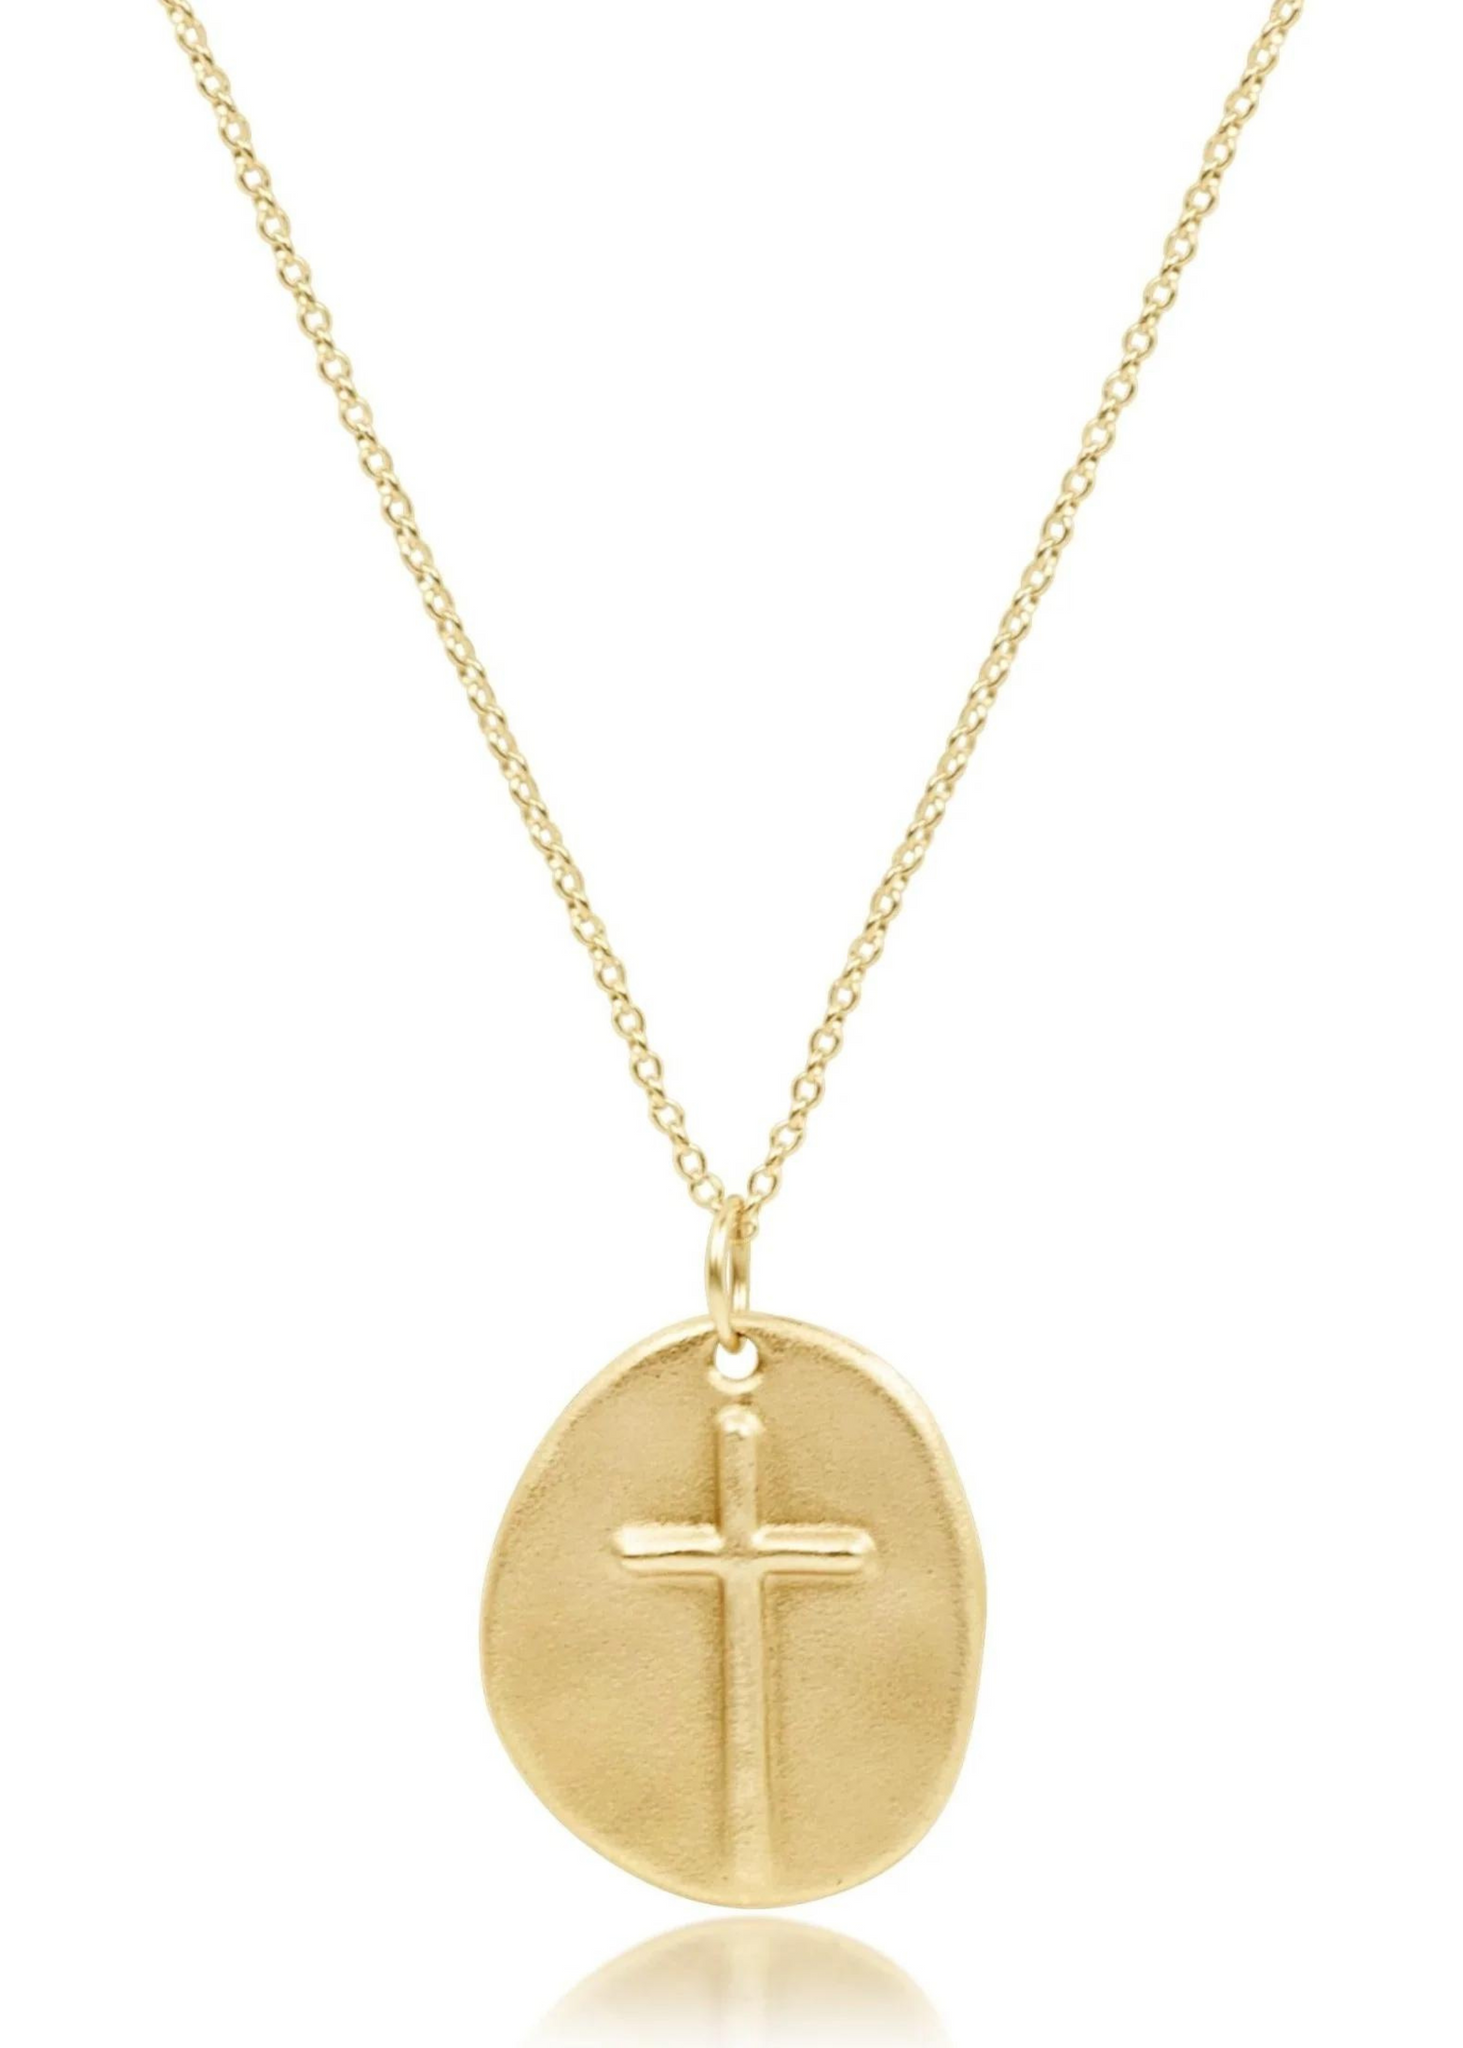 16" Necklace Gold - Inspire Gold Charm